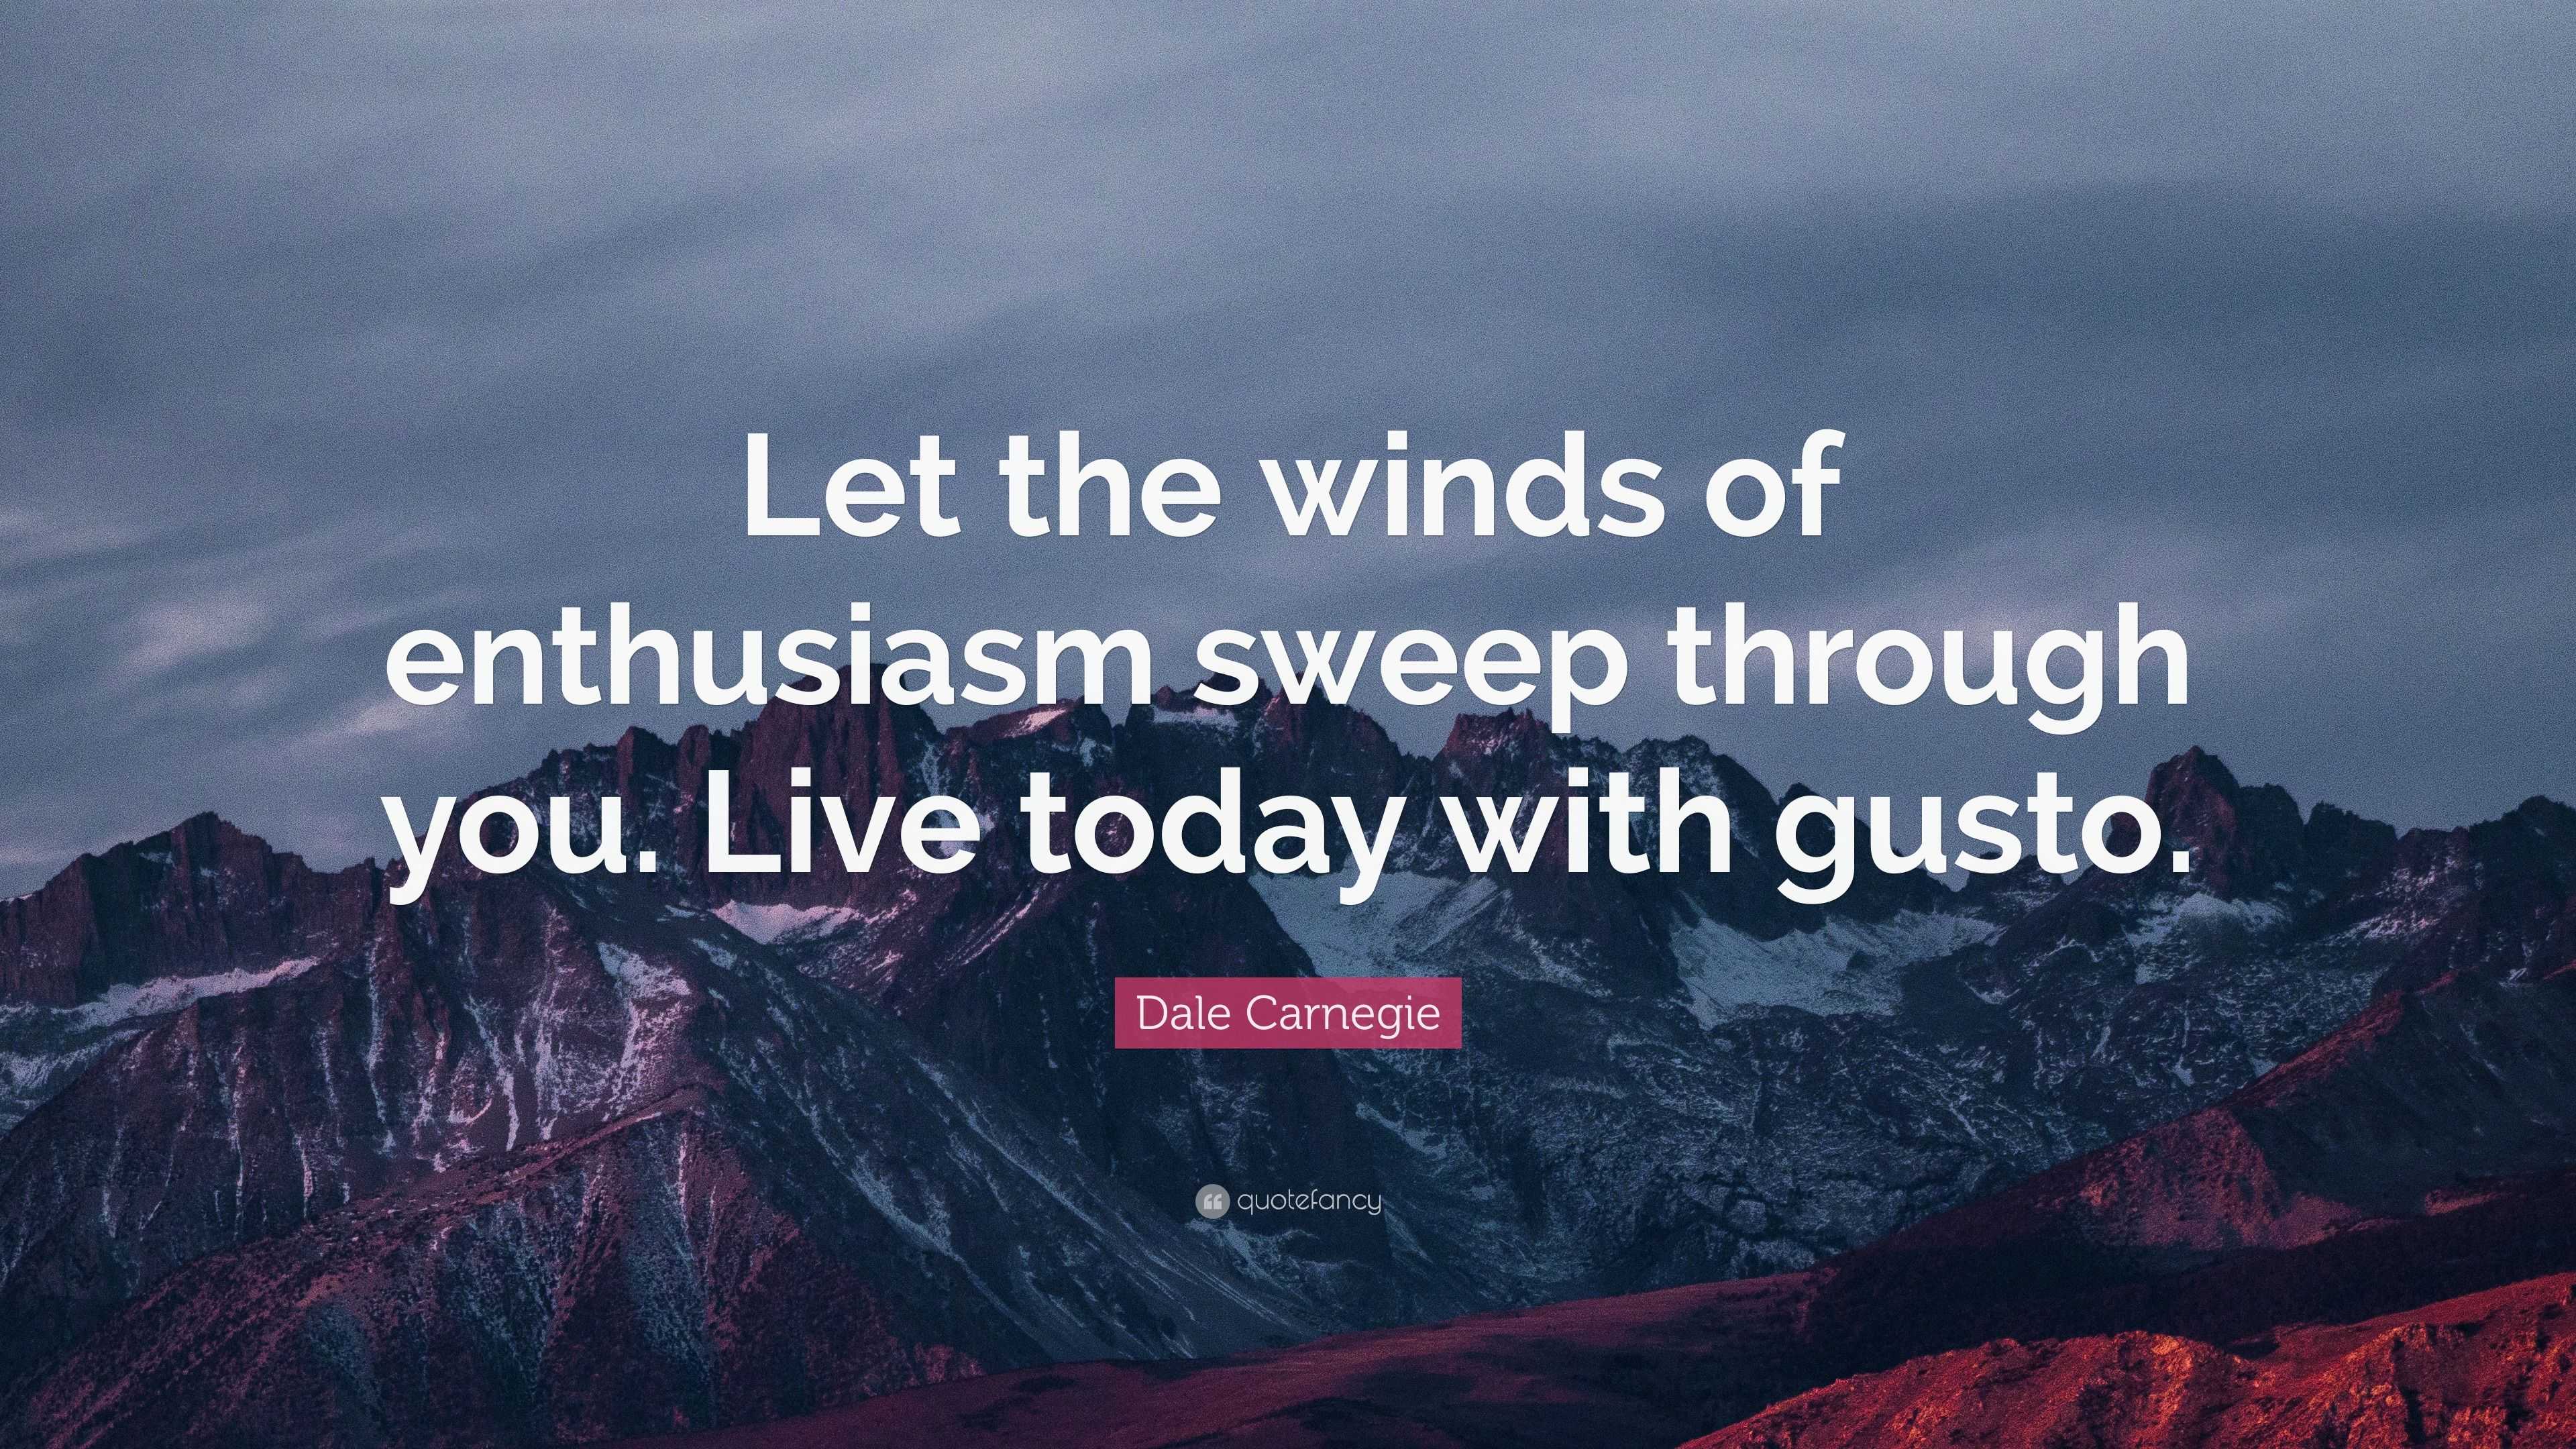 Dale Carnegie Quote: “Let the winds of enthusiasm sweep through you. Live  today with gusto.”